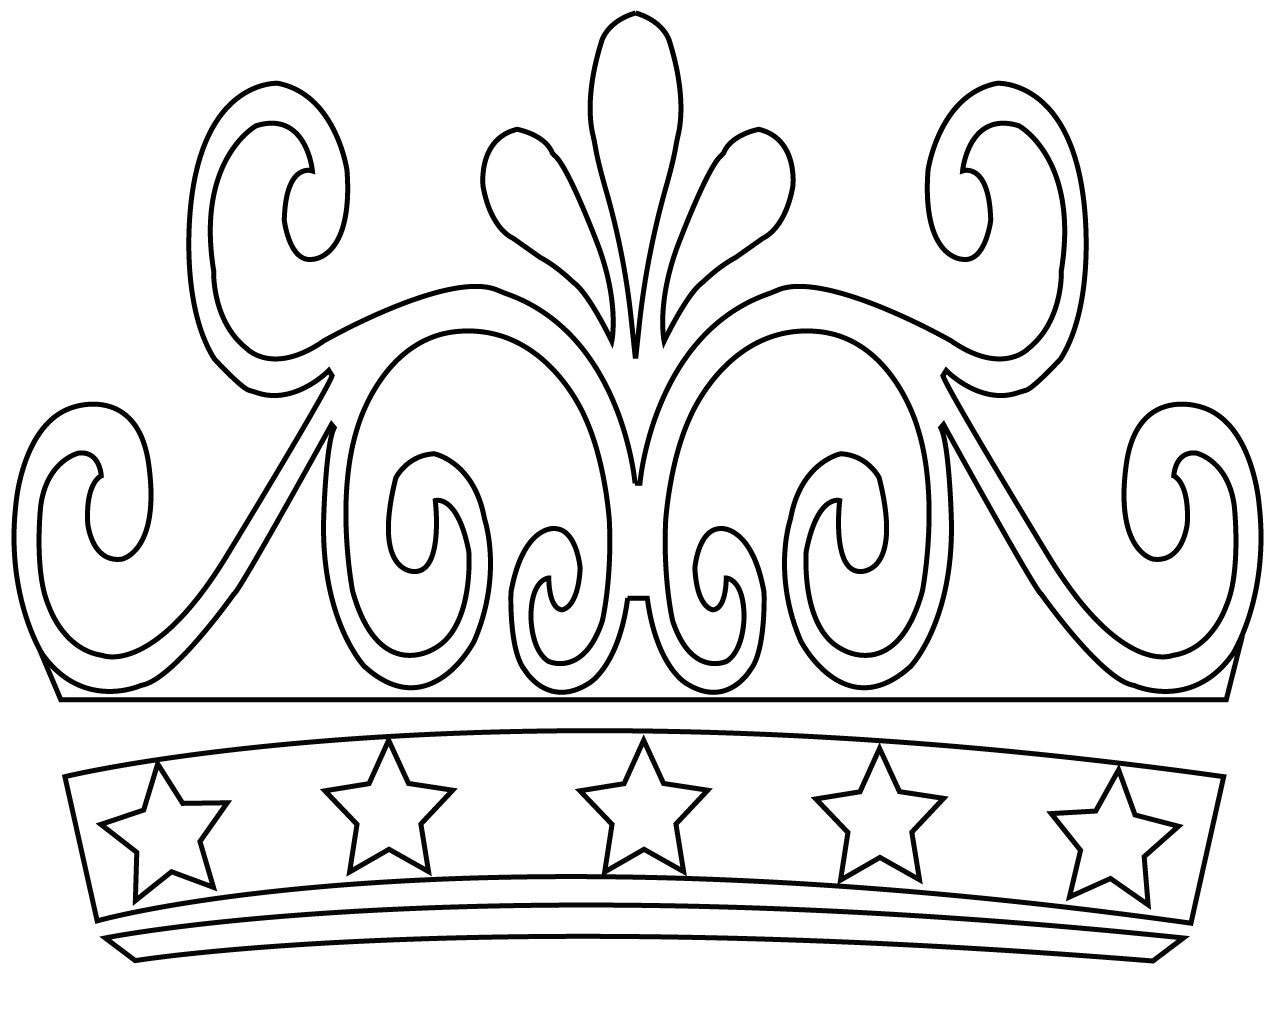 Crown Coloring Pages To Print, Simple, Birthday, Princess Free Download